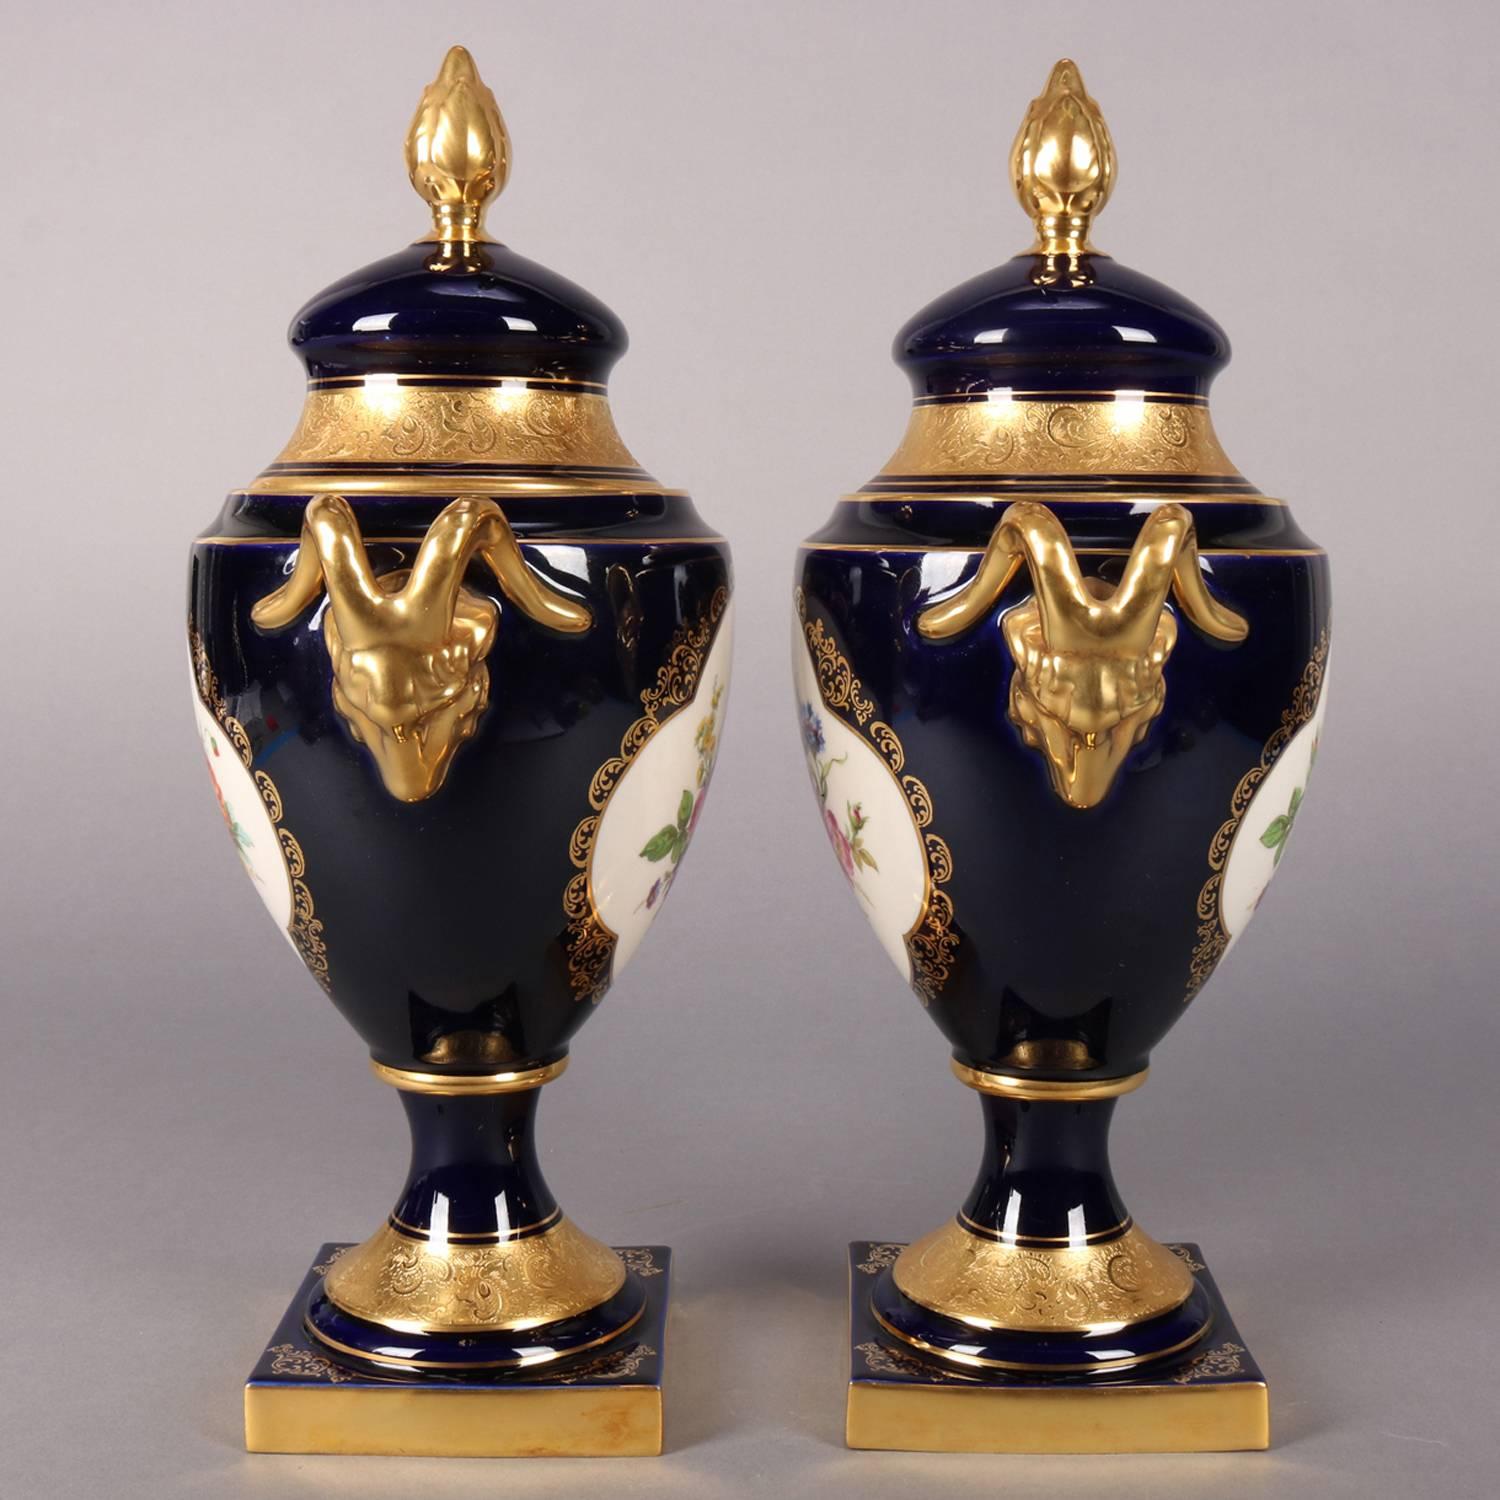 20th Century Western Germany Meissen School Hand-Painted Cobalt and Gilt Porcelain Urns